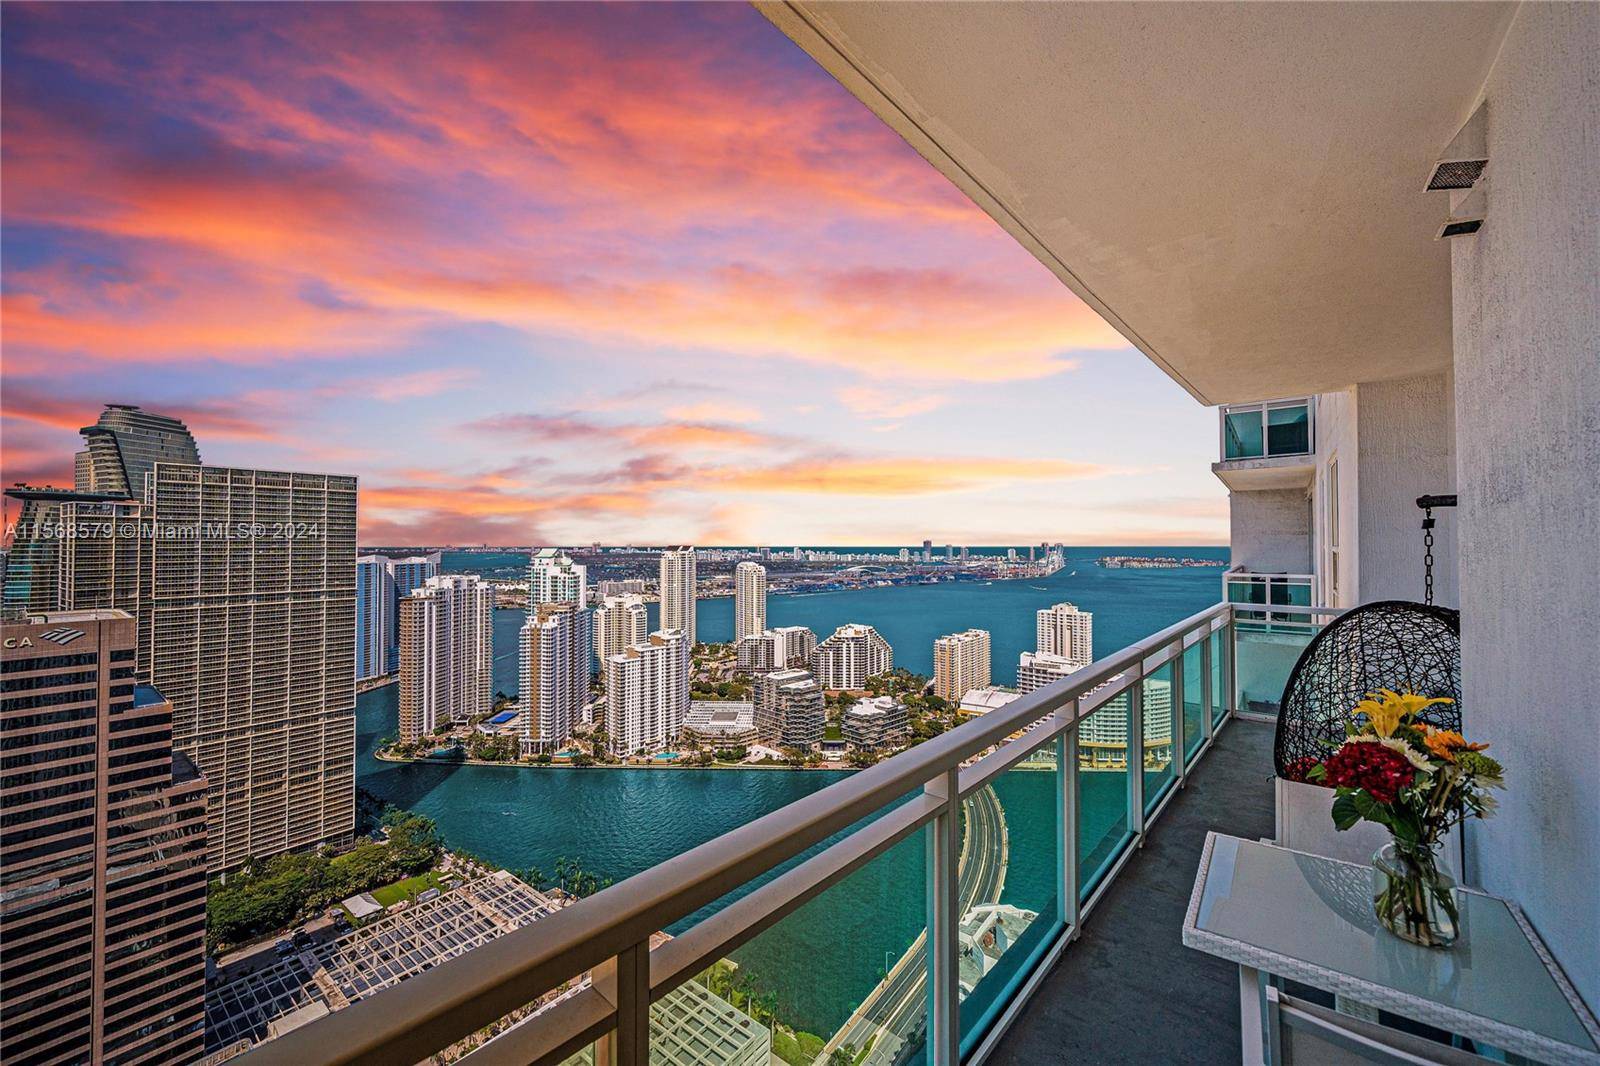 Experience elevated living in this stunning 50th floor home in the sky at Plaza on Brickell.